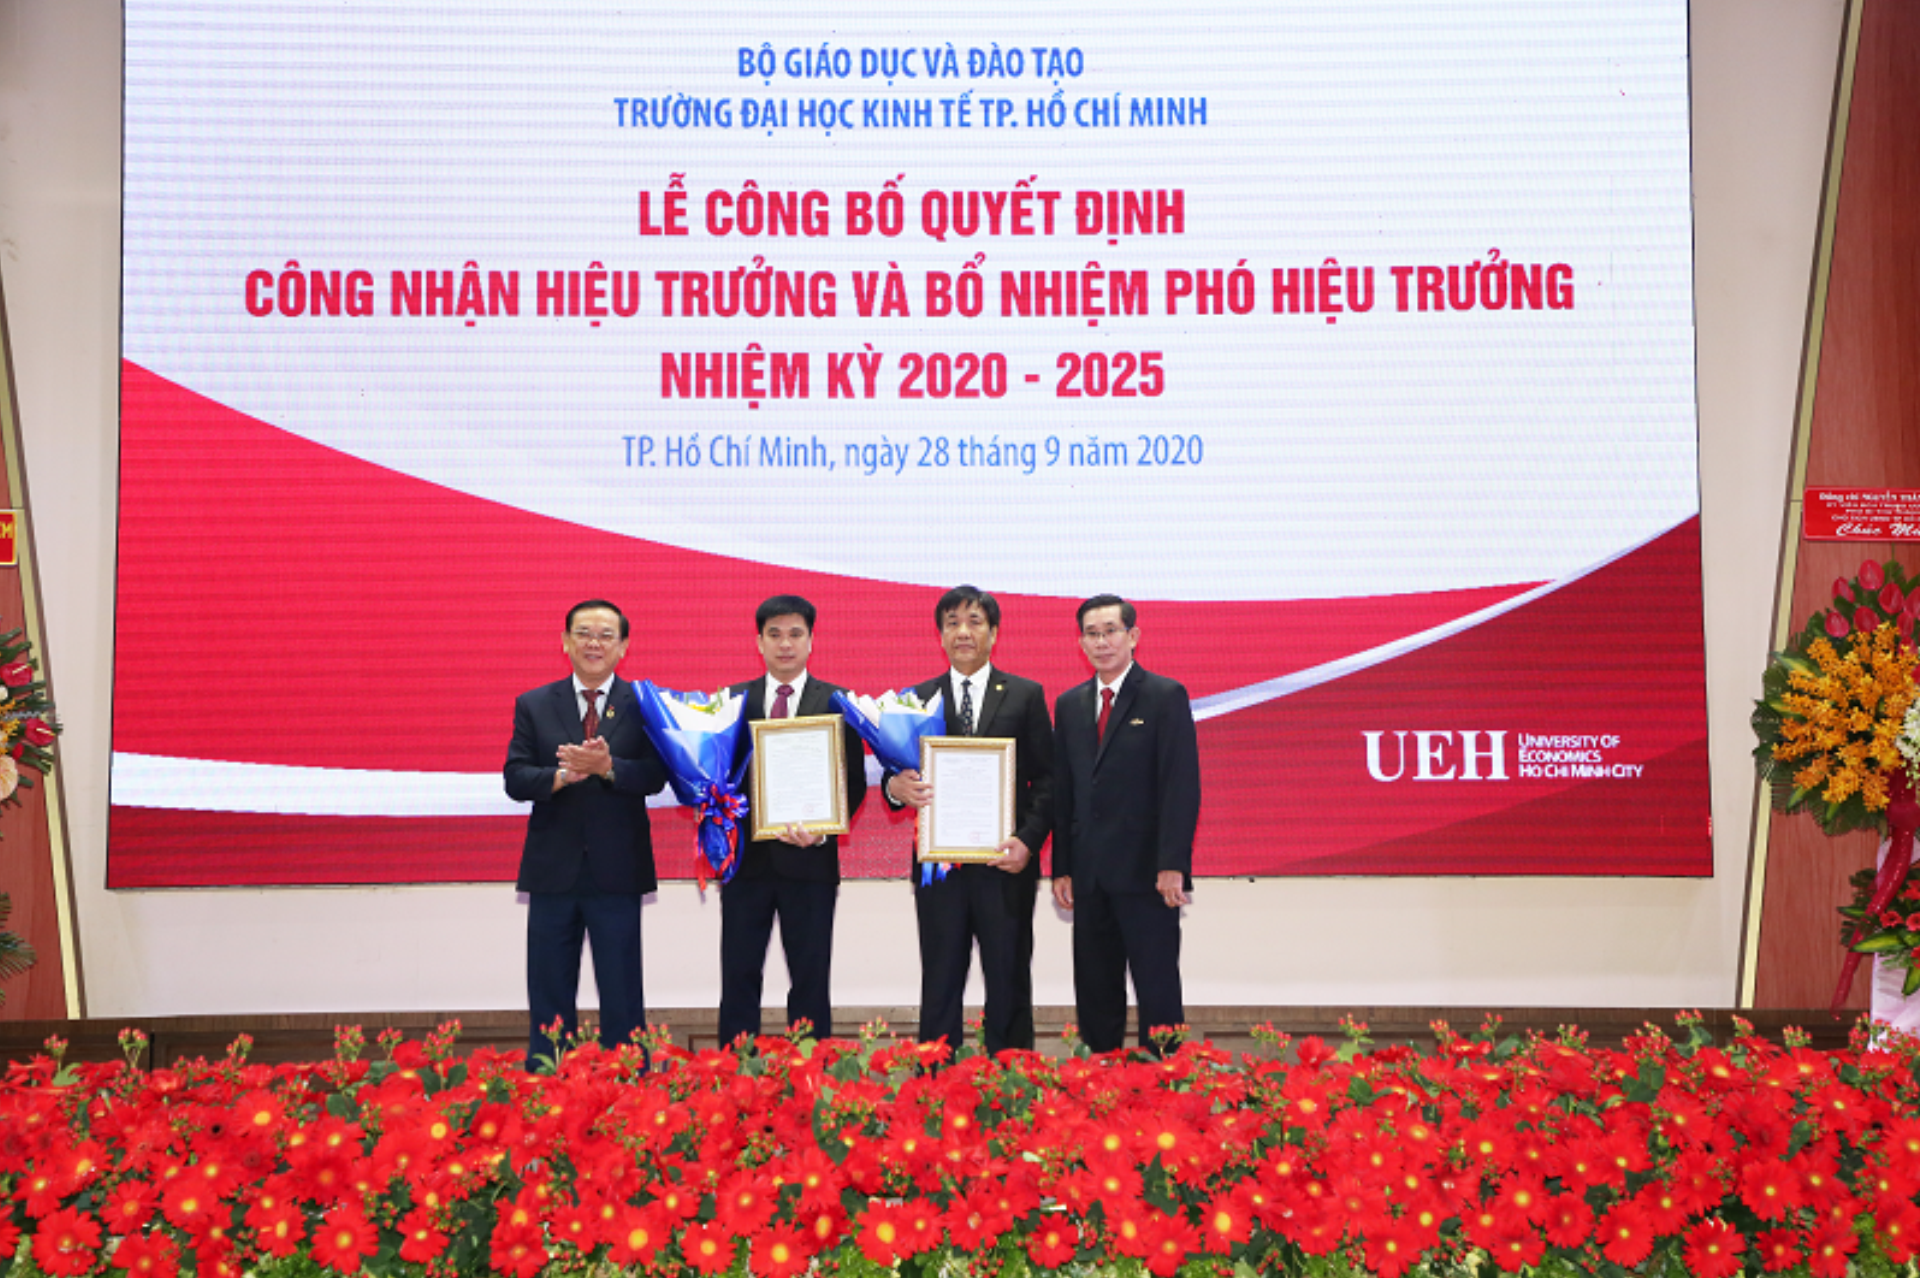 Develop University of Economics Ho Chi Minh City unified on all aspects of its activities